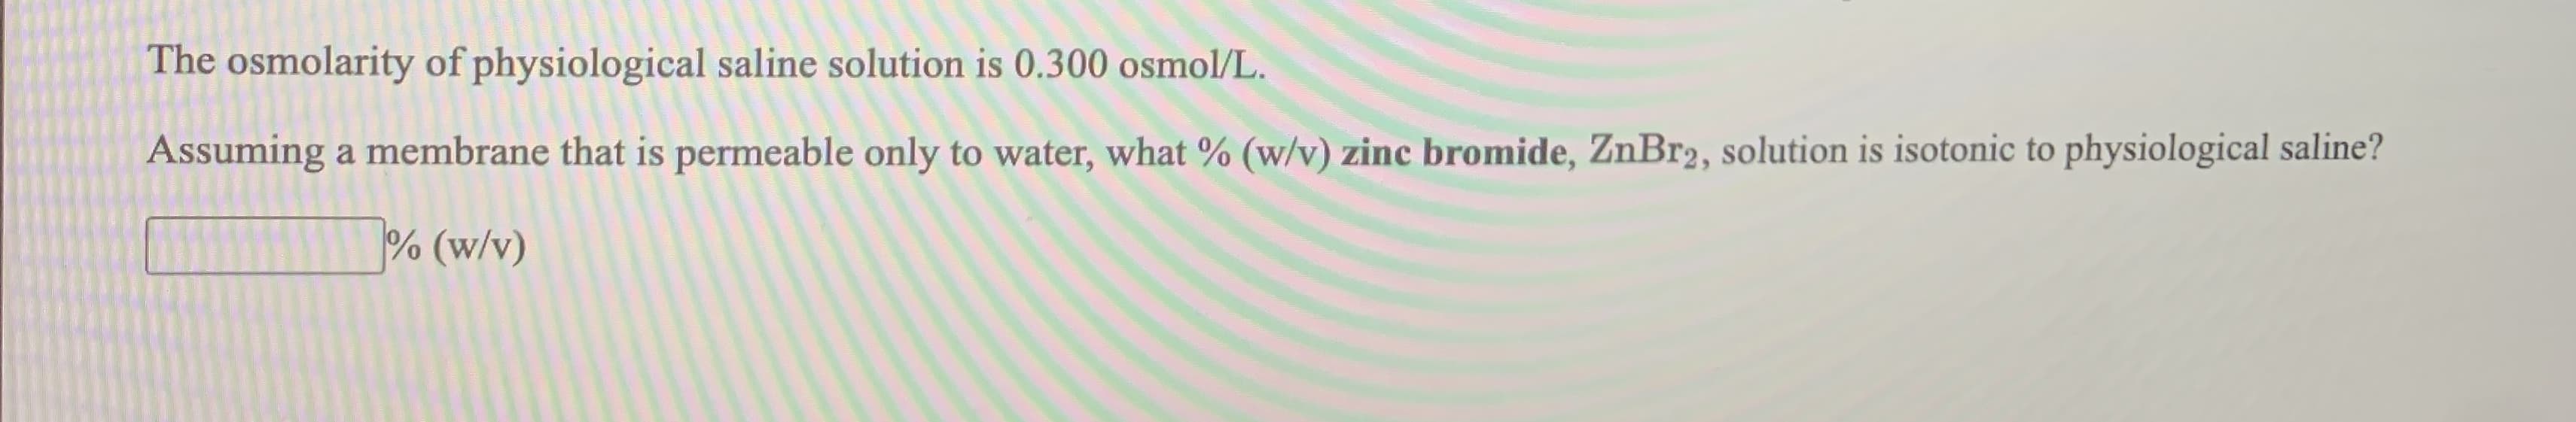 The osmolarity of physiological saline solution is 0.300 osmol/L.
Assuming a membrane that is permeable only to water, what % (w/v) zinc bromide, ZnBr2, solution is isotonic to physiological saline?
% (w/v)
